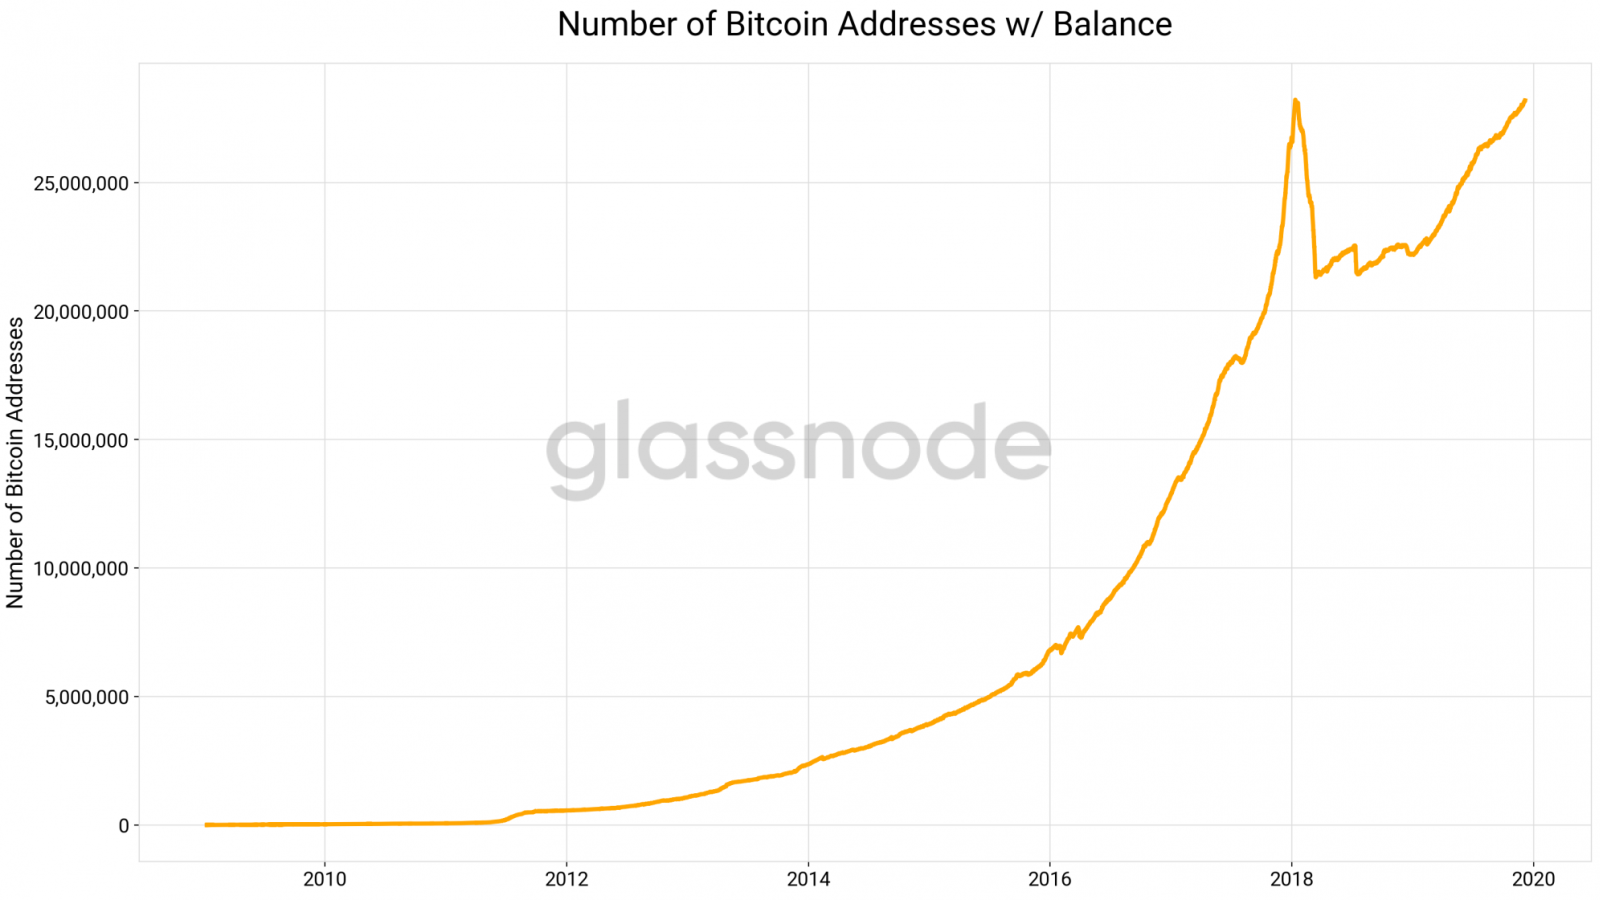 Number of Bitcoin Addresses 